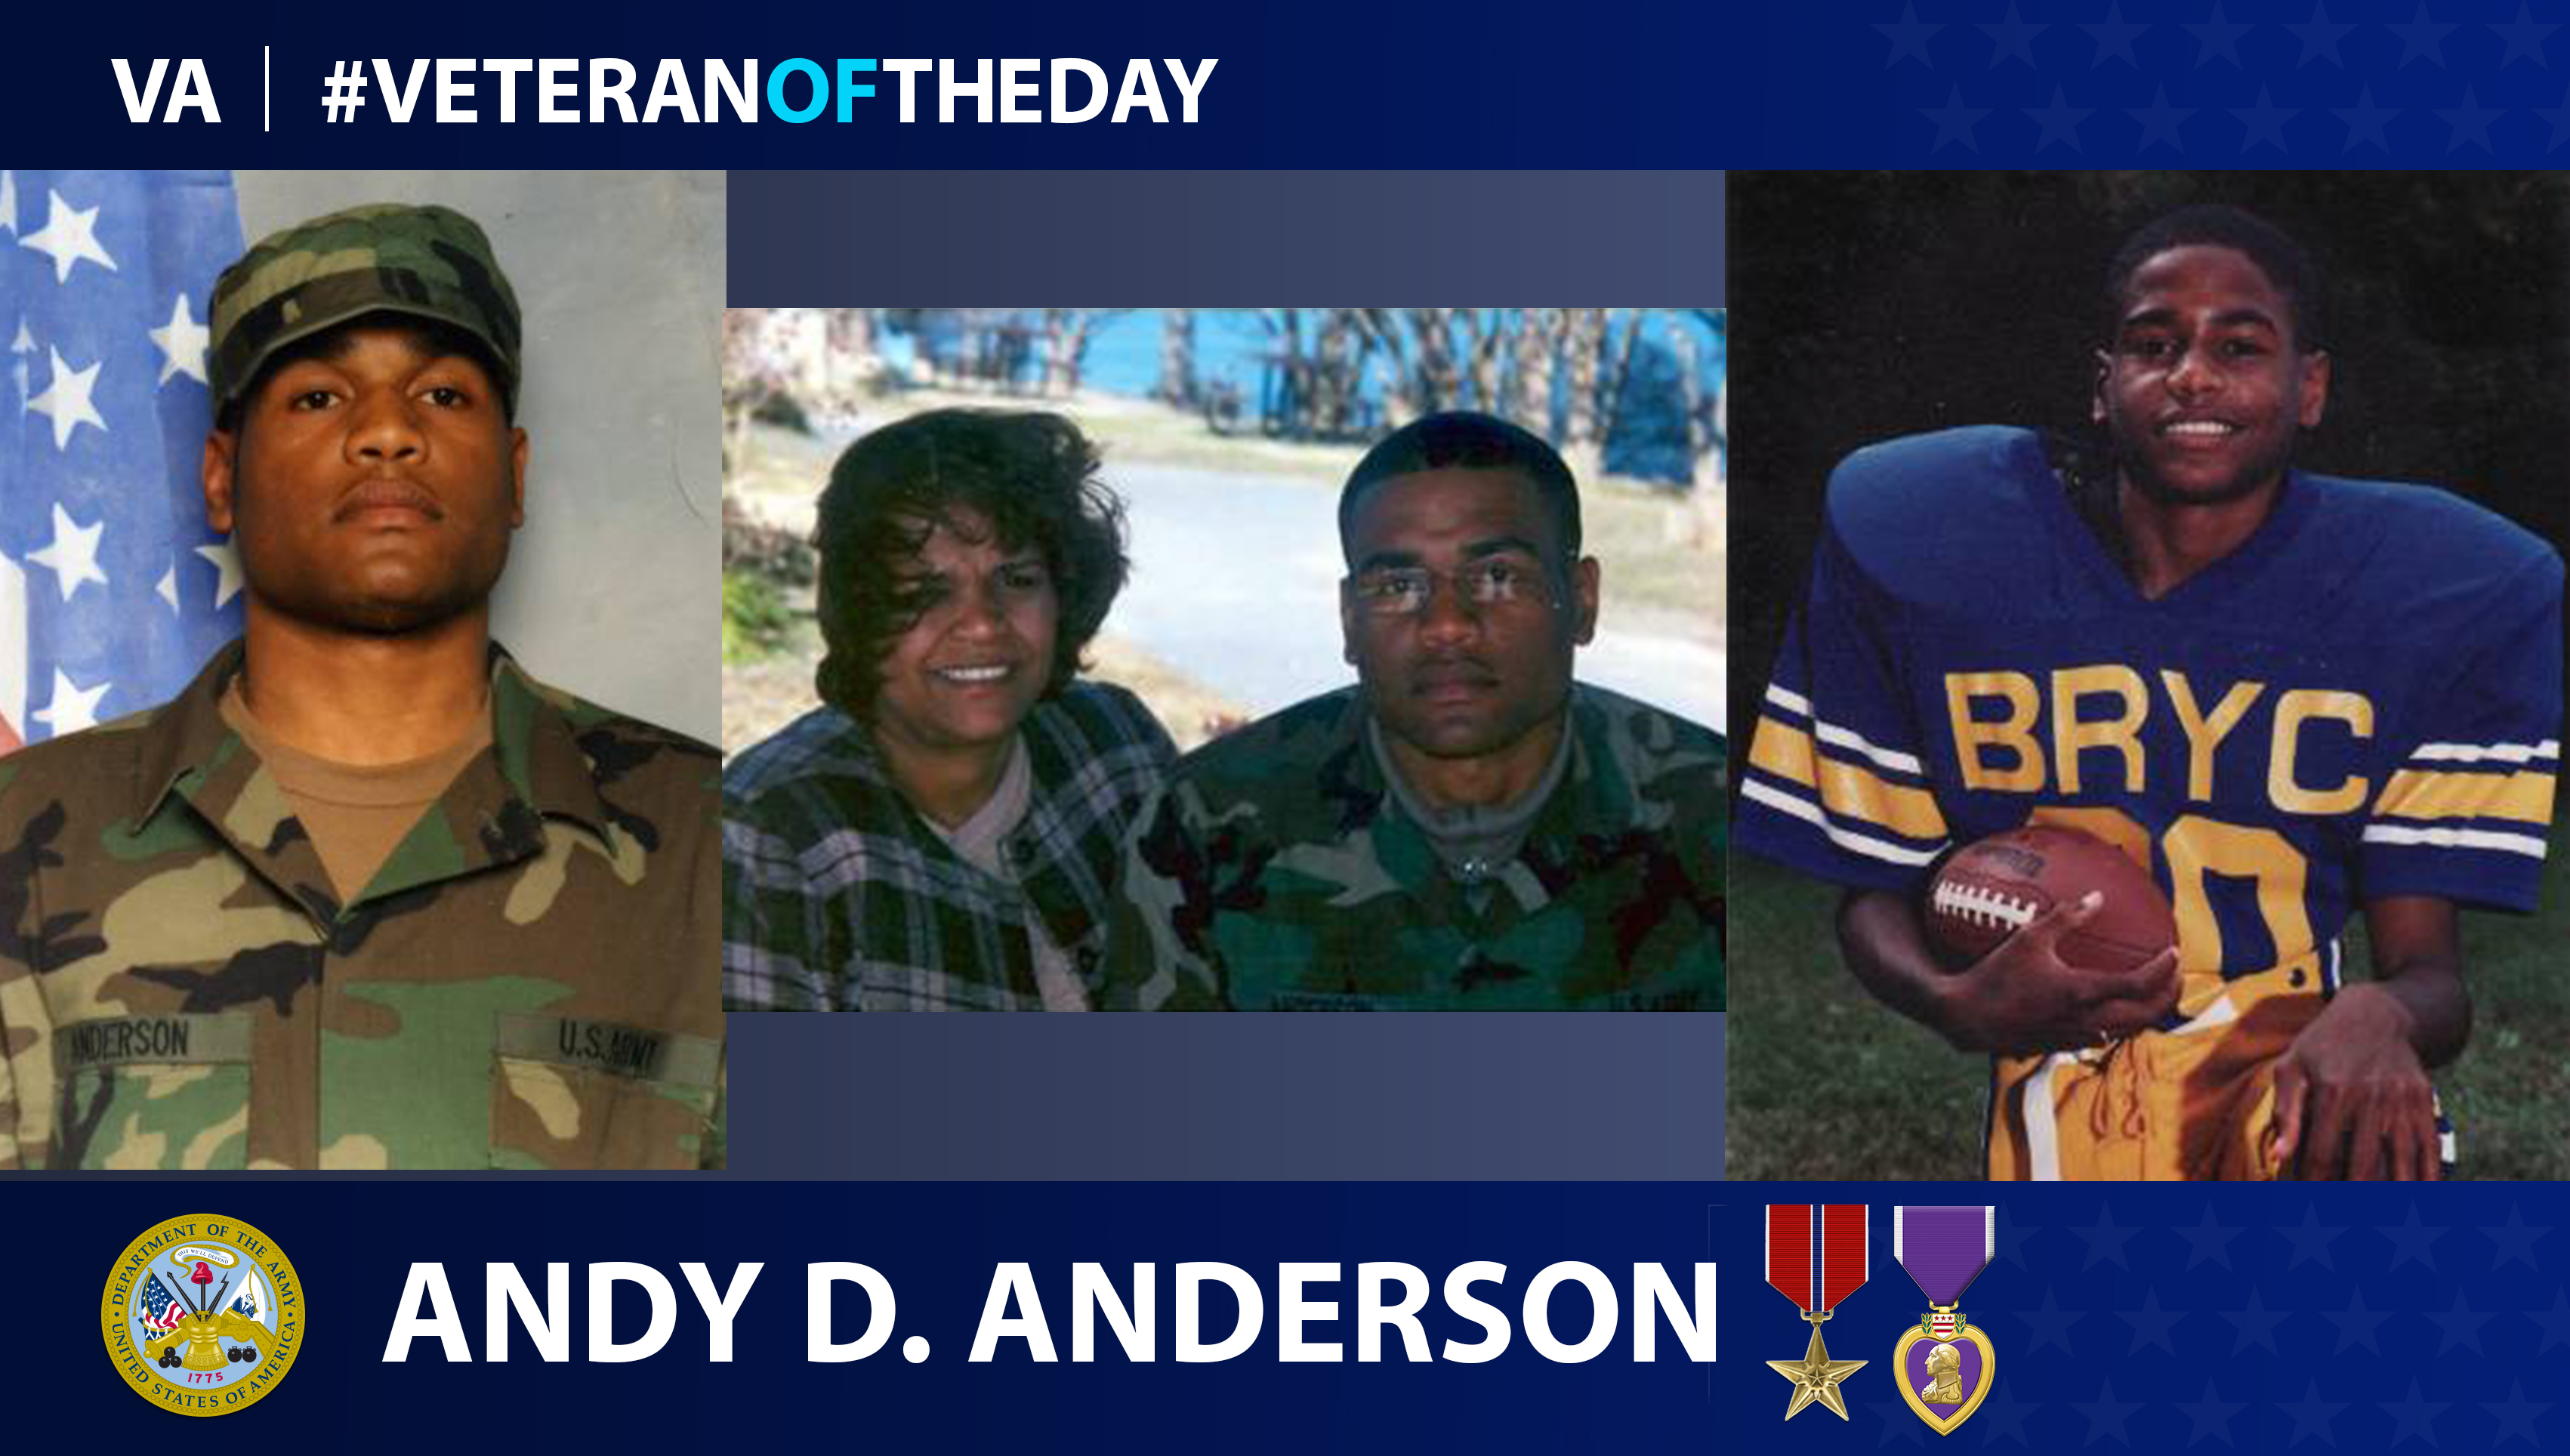 Army Veteran Andy D. Anderson is today's Veteran of the Day.